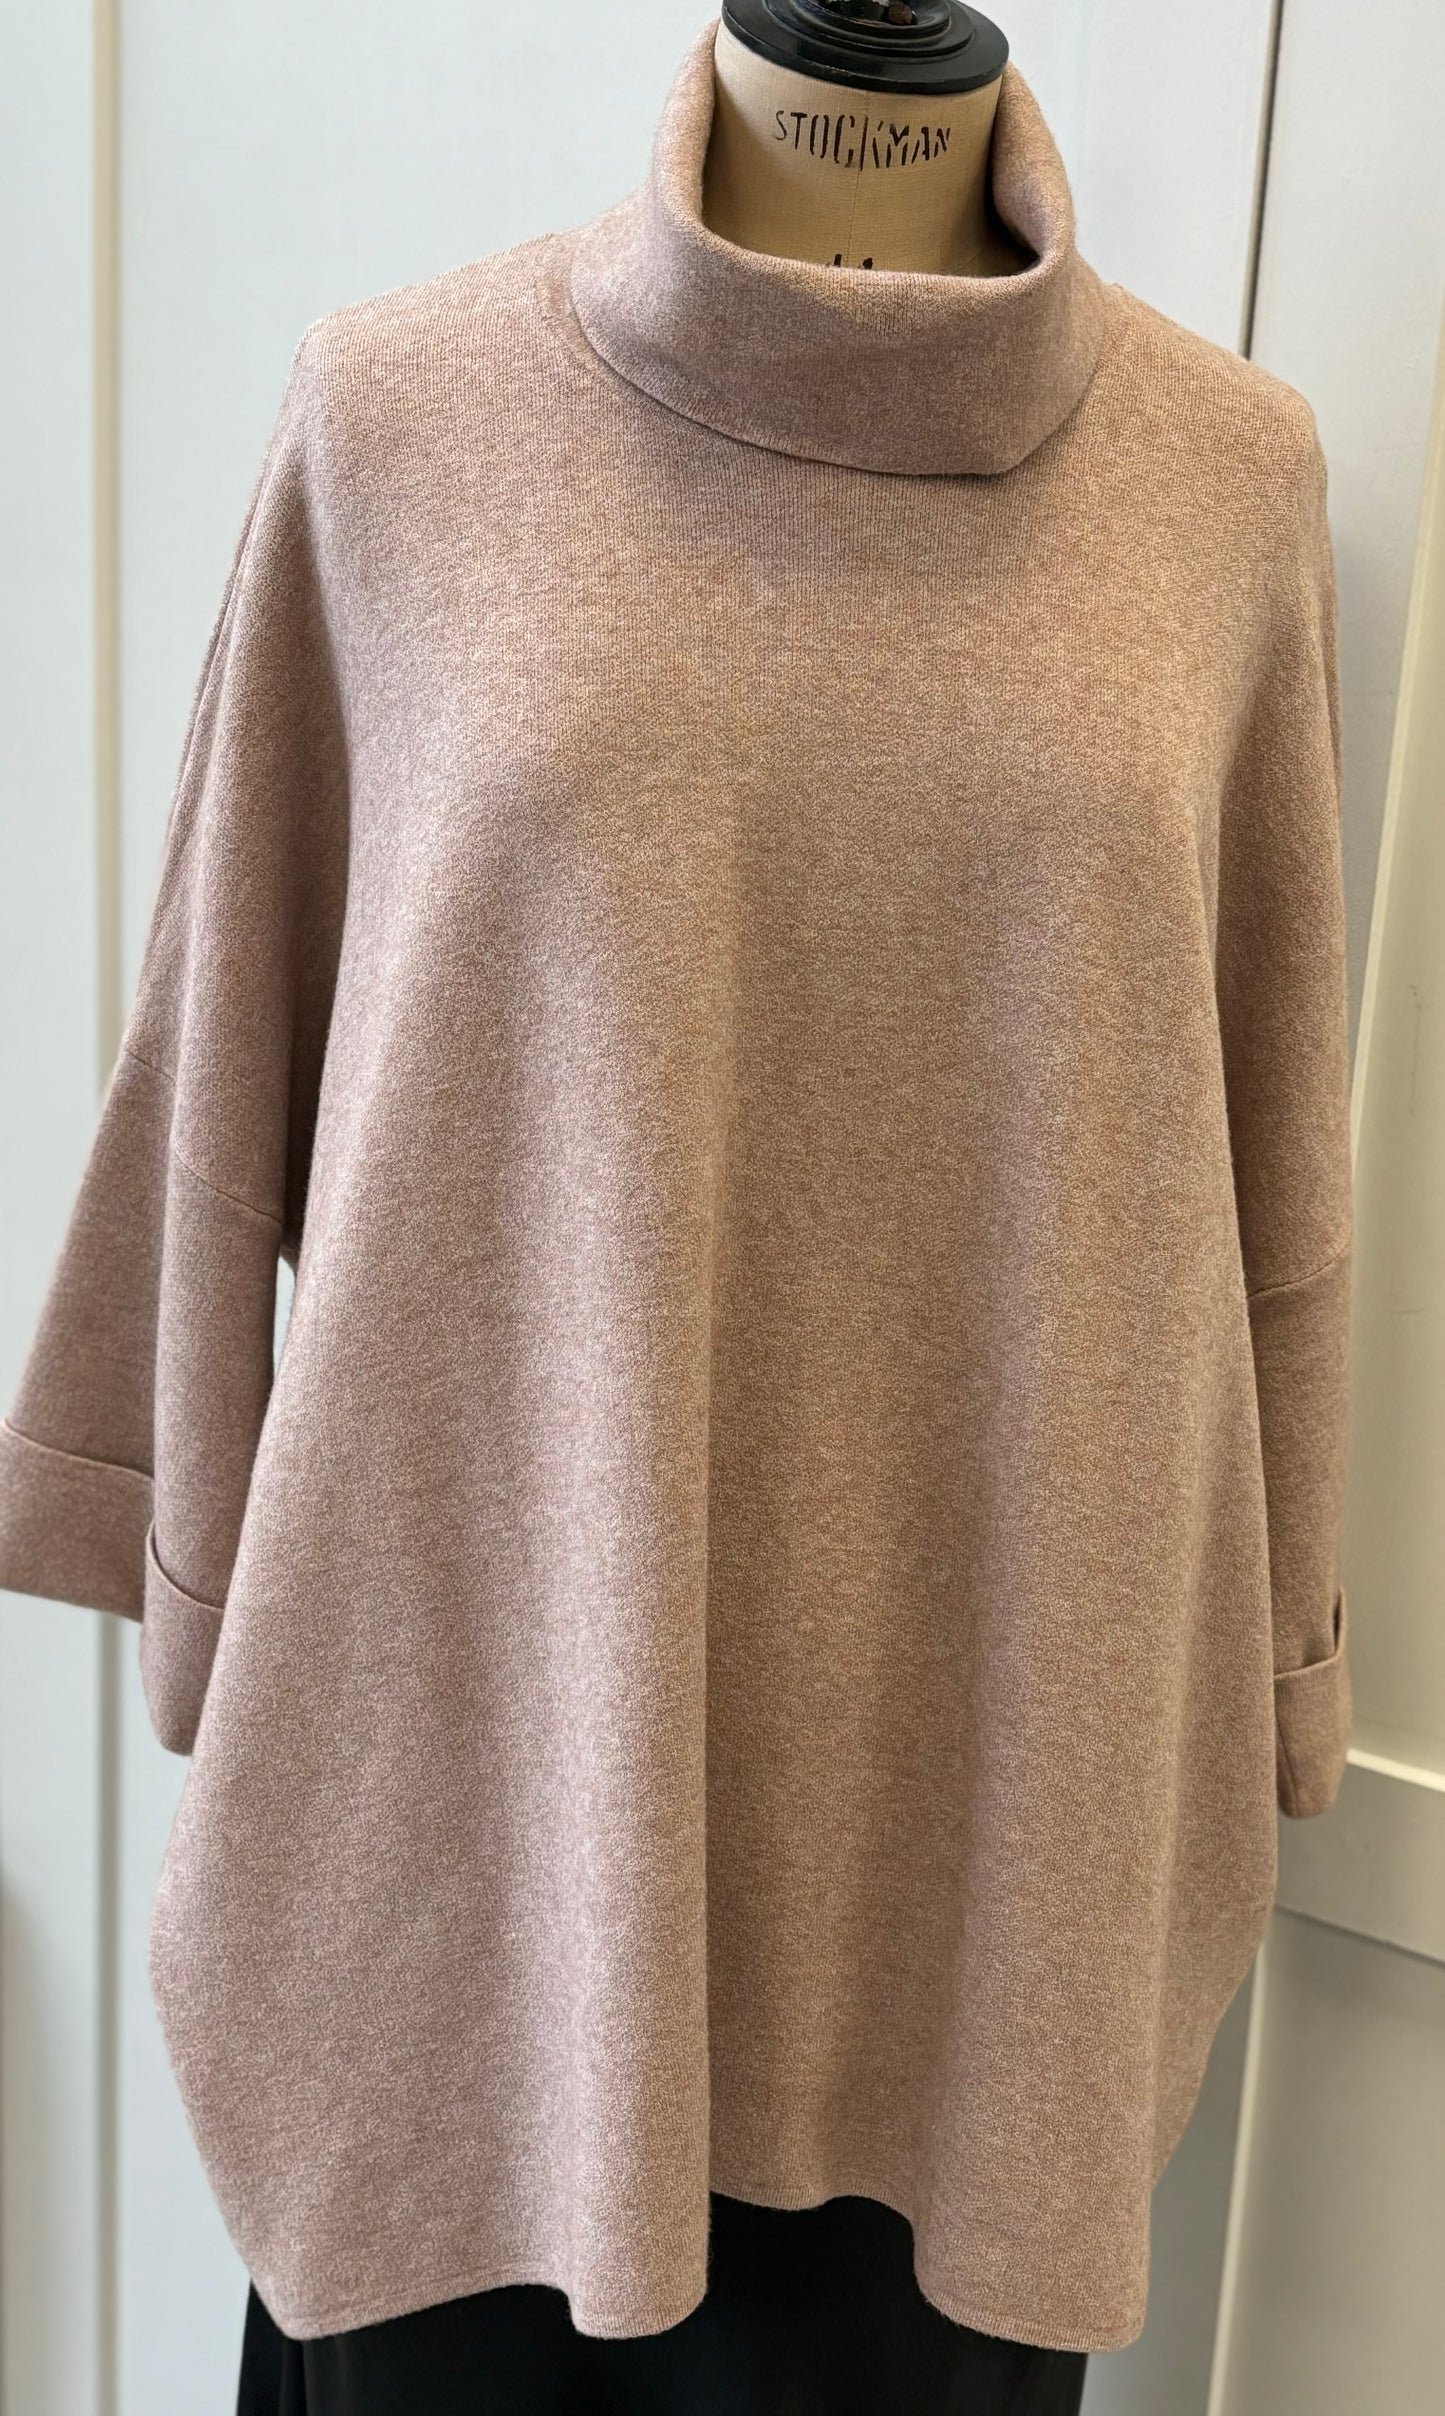 The Pam Cowl Neck Tunic Jumper